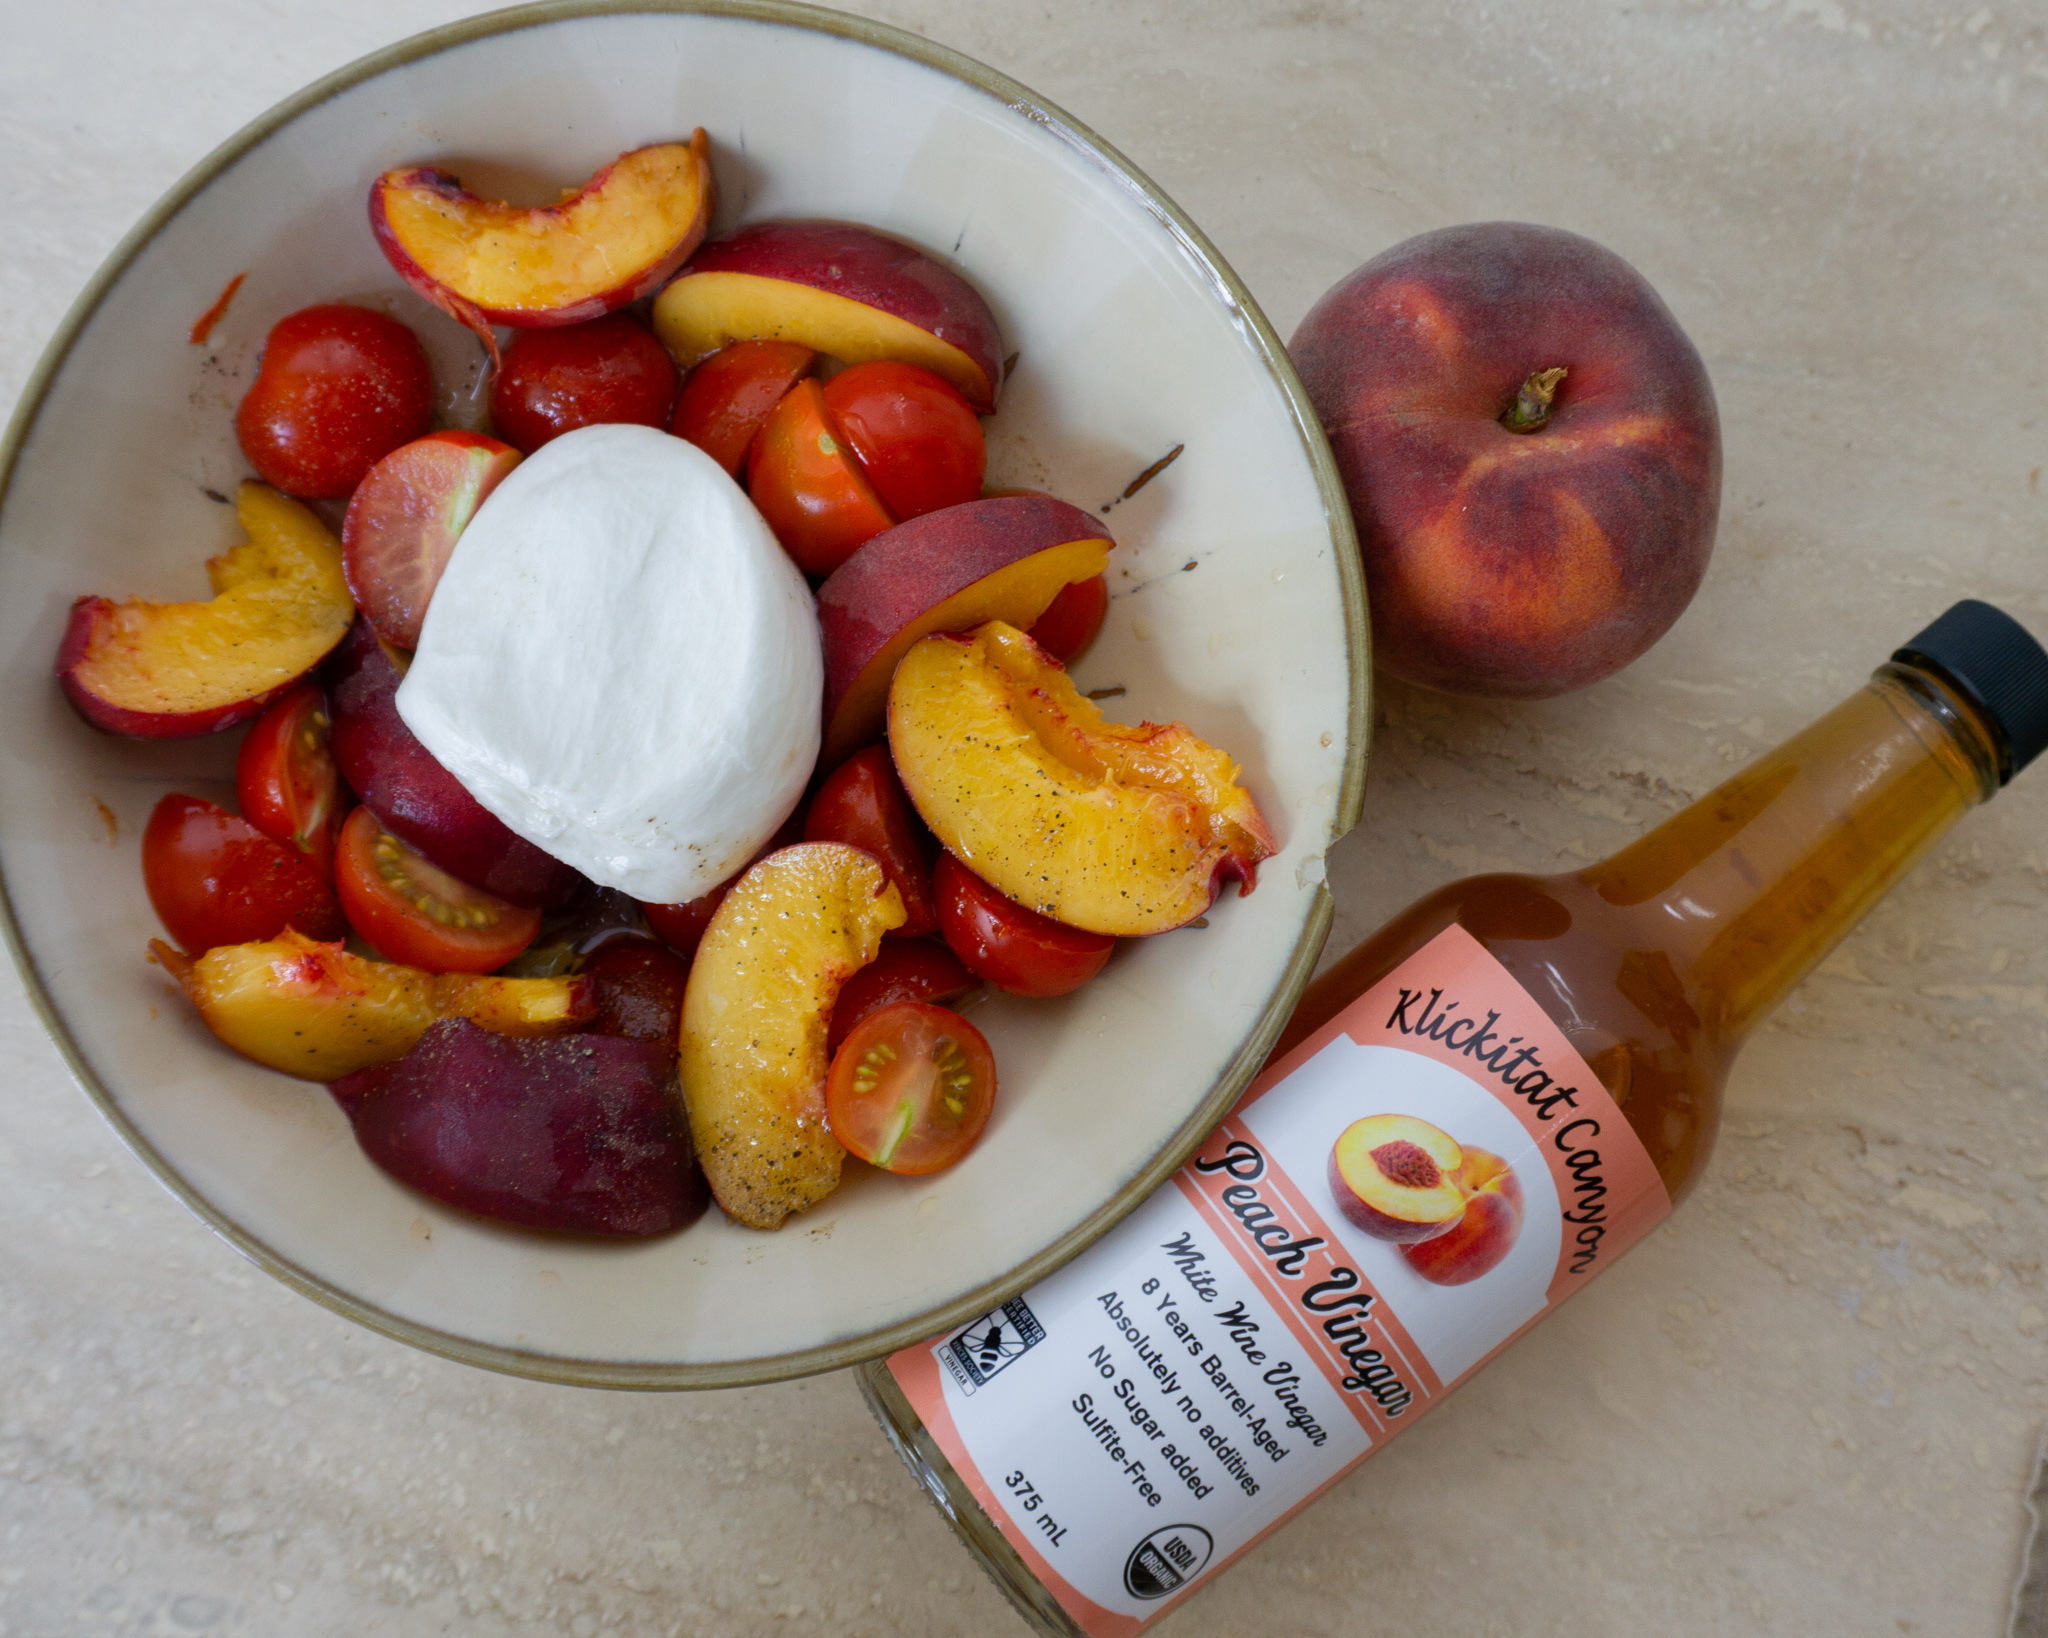 A bottle of vinegar lies on a table beside a bowl full of slices of peach and cherry tomatoes